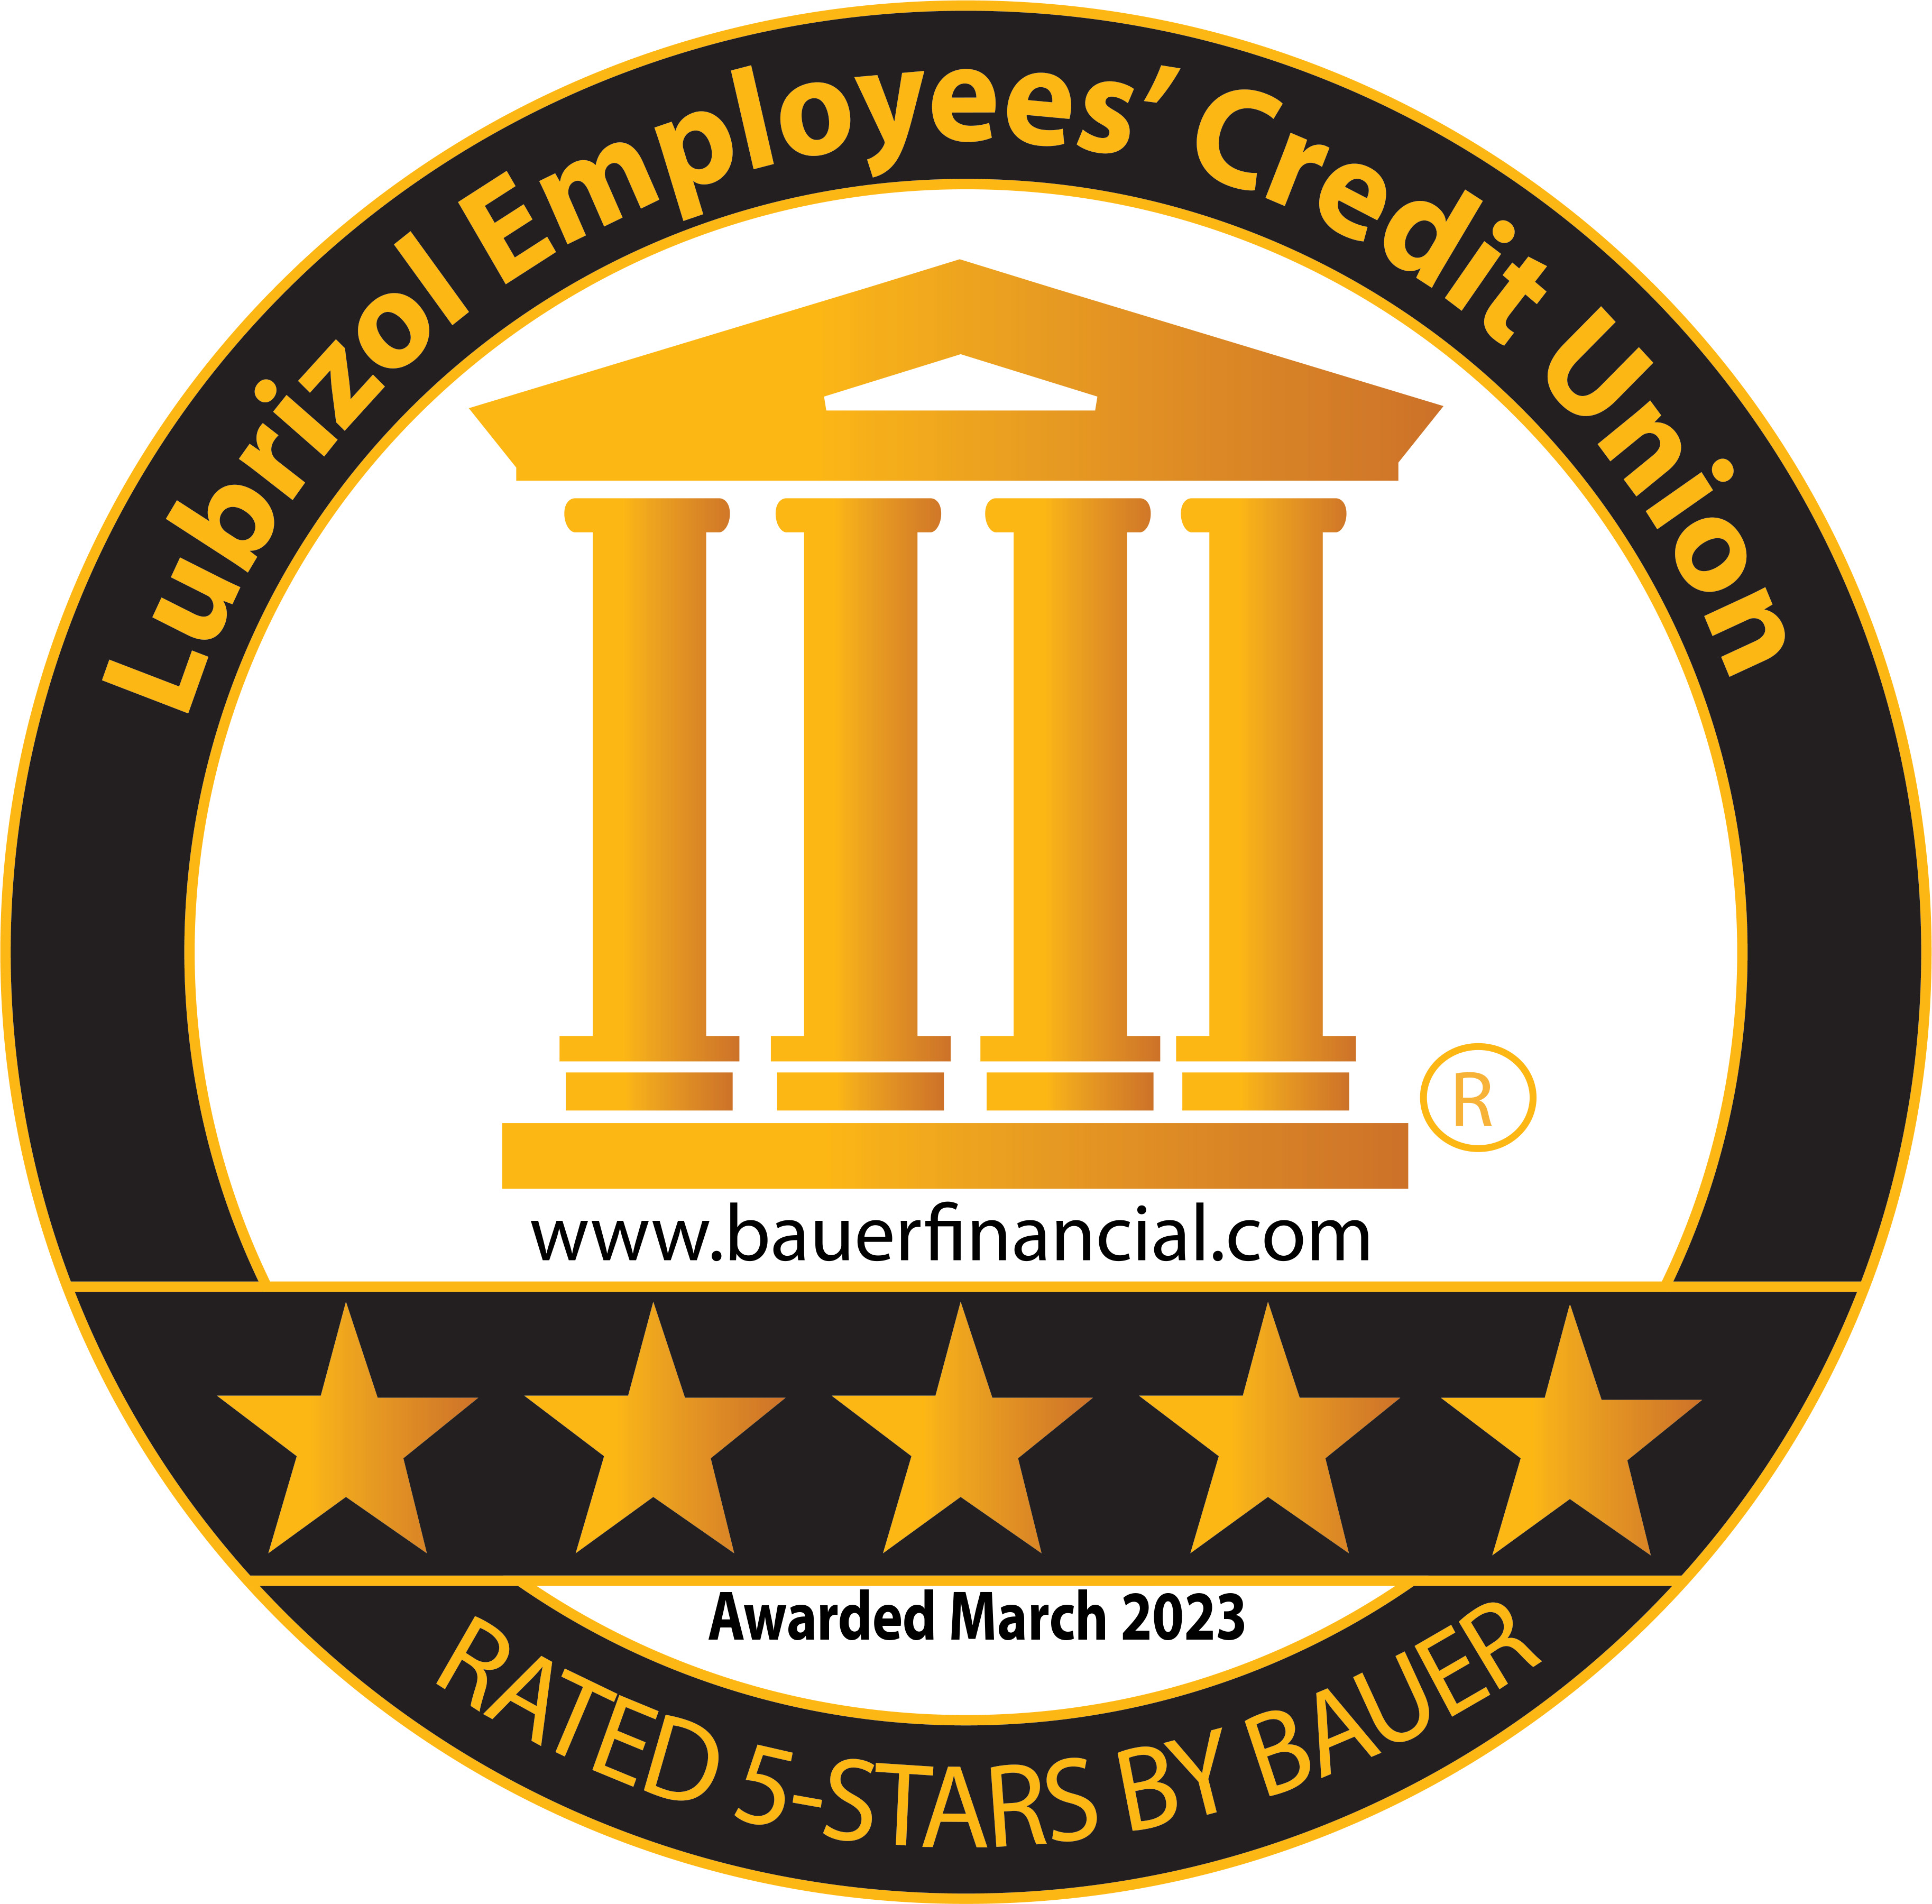 Bauer Financial 5 star rating awarded March 2023